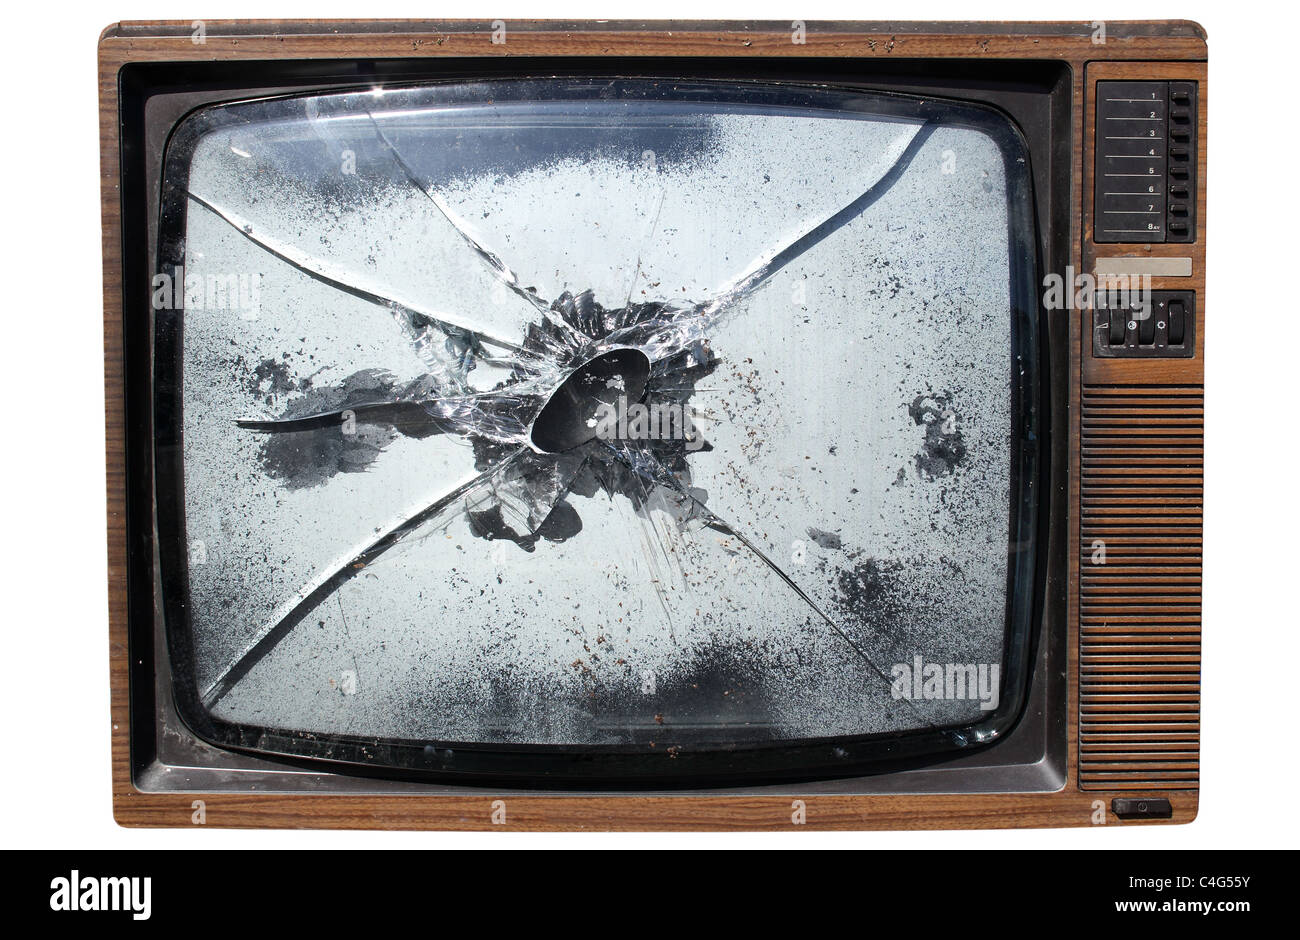 Old TV with a smashed screen, isolated on a white background. Stock Photo